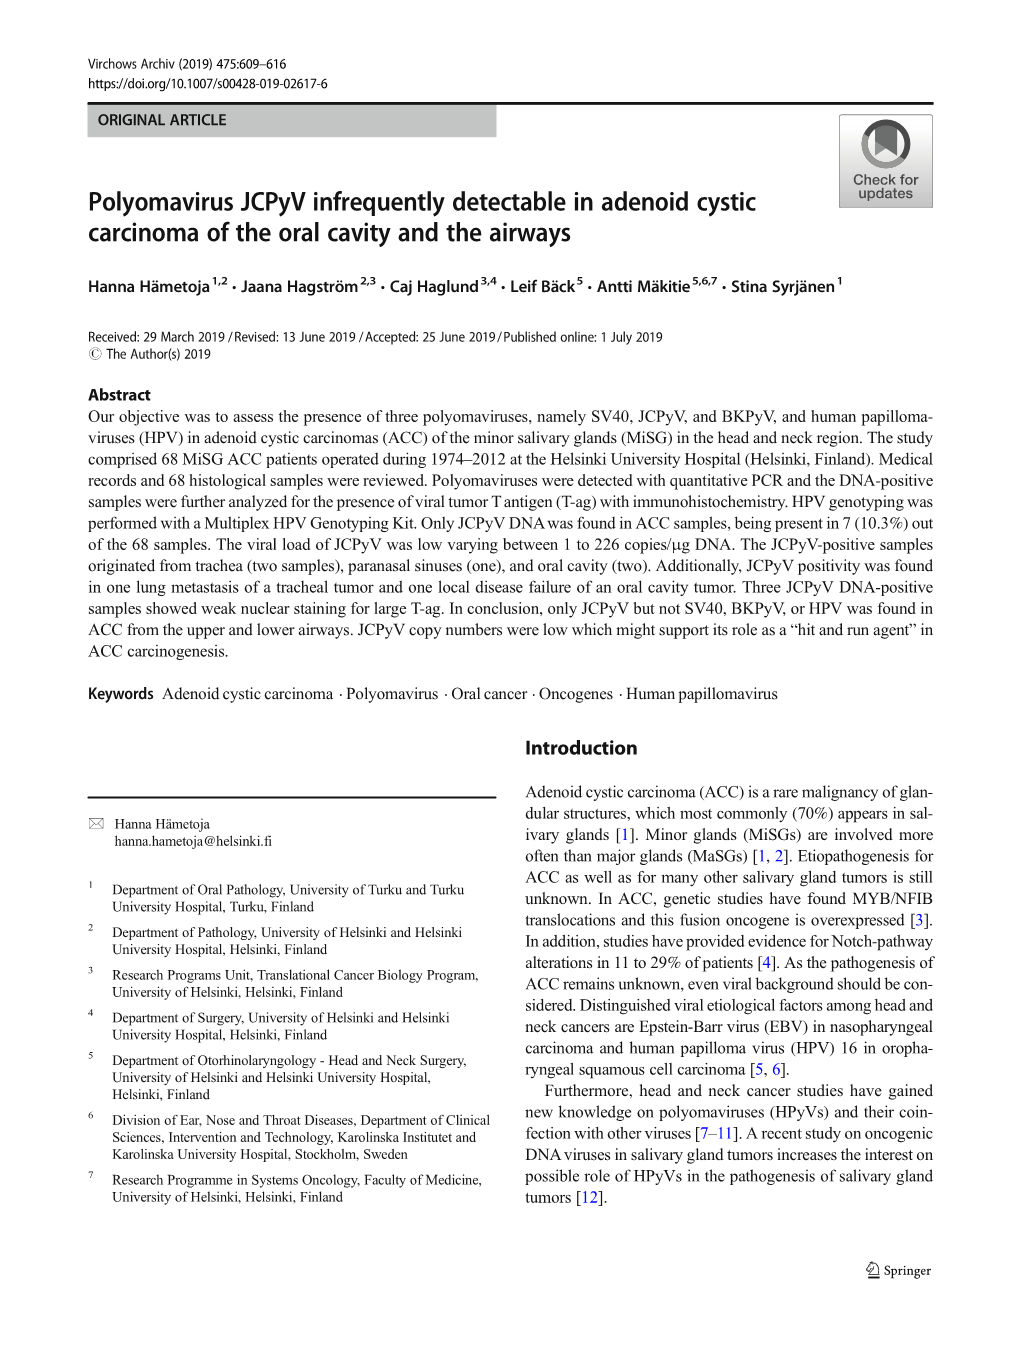 Polyomavirus Jcpyv Infrequently Detectable in Adenoid Cystic Carcinoma of the Oral Cavity and the Airways